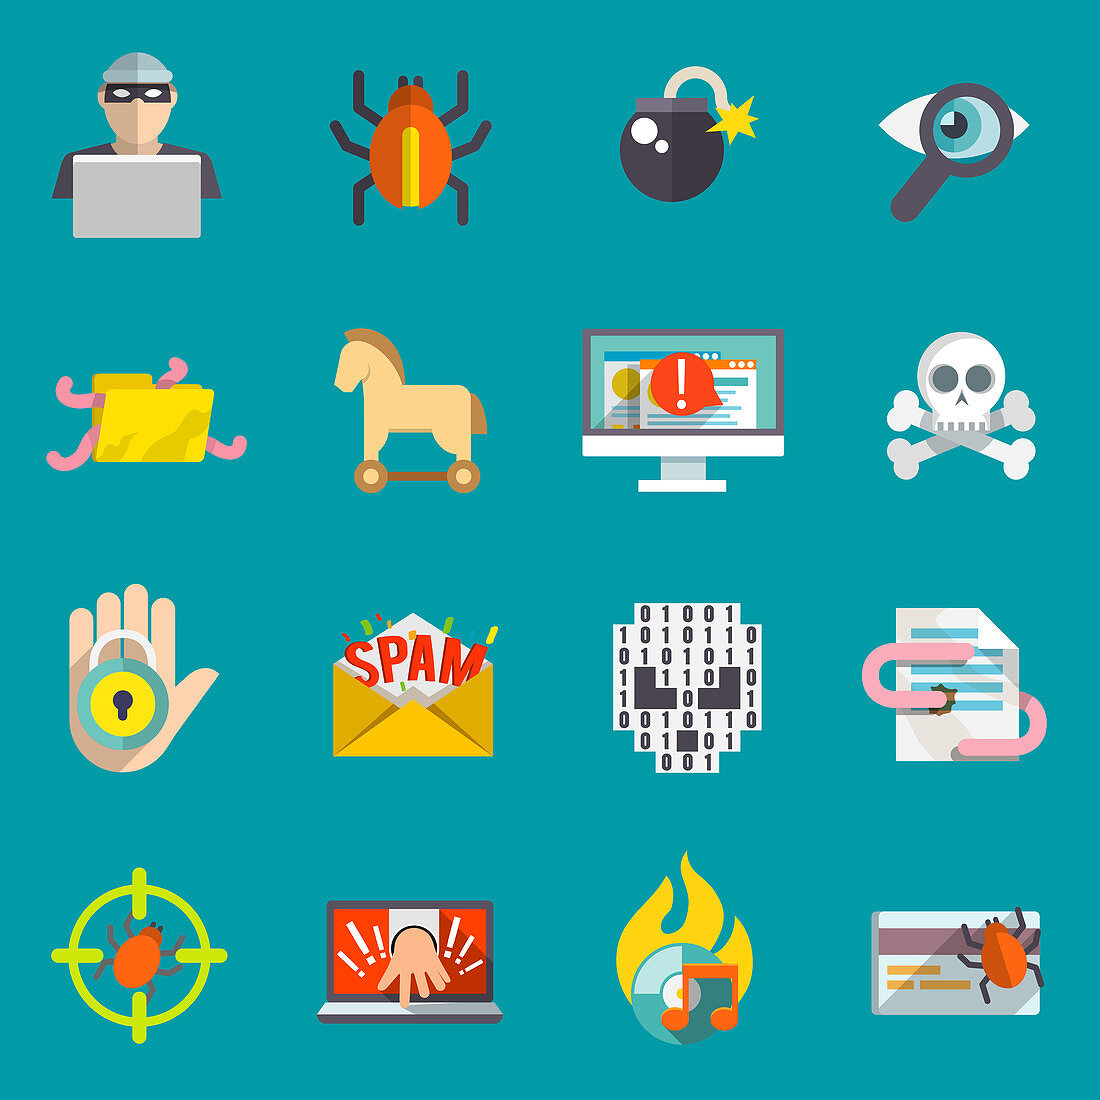 Hacker and computer security icons, illustration